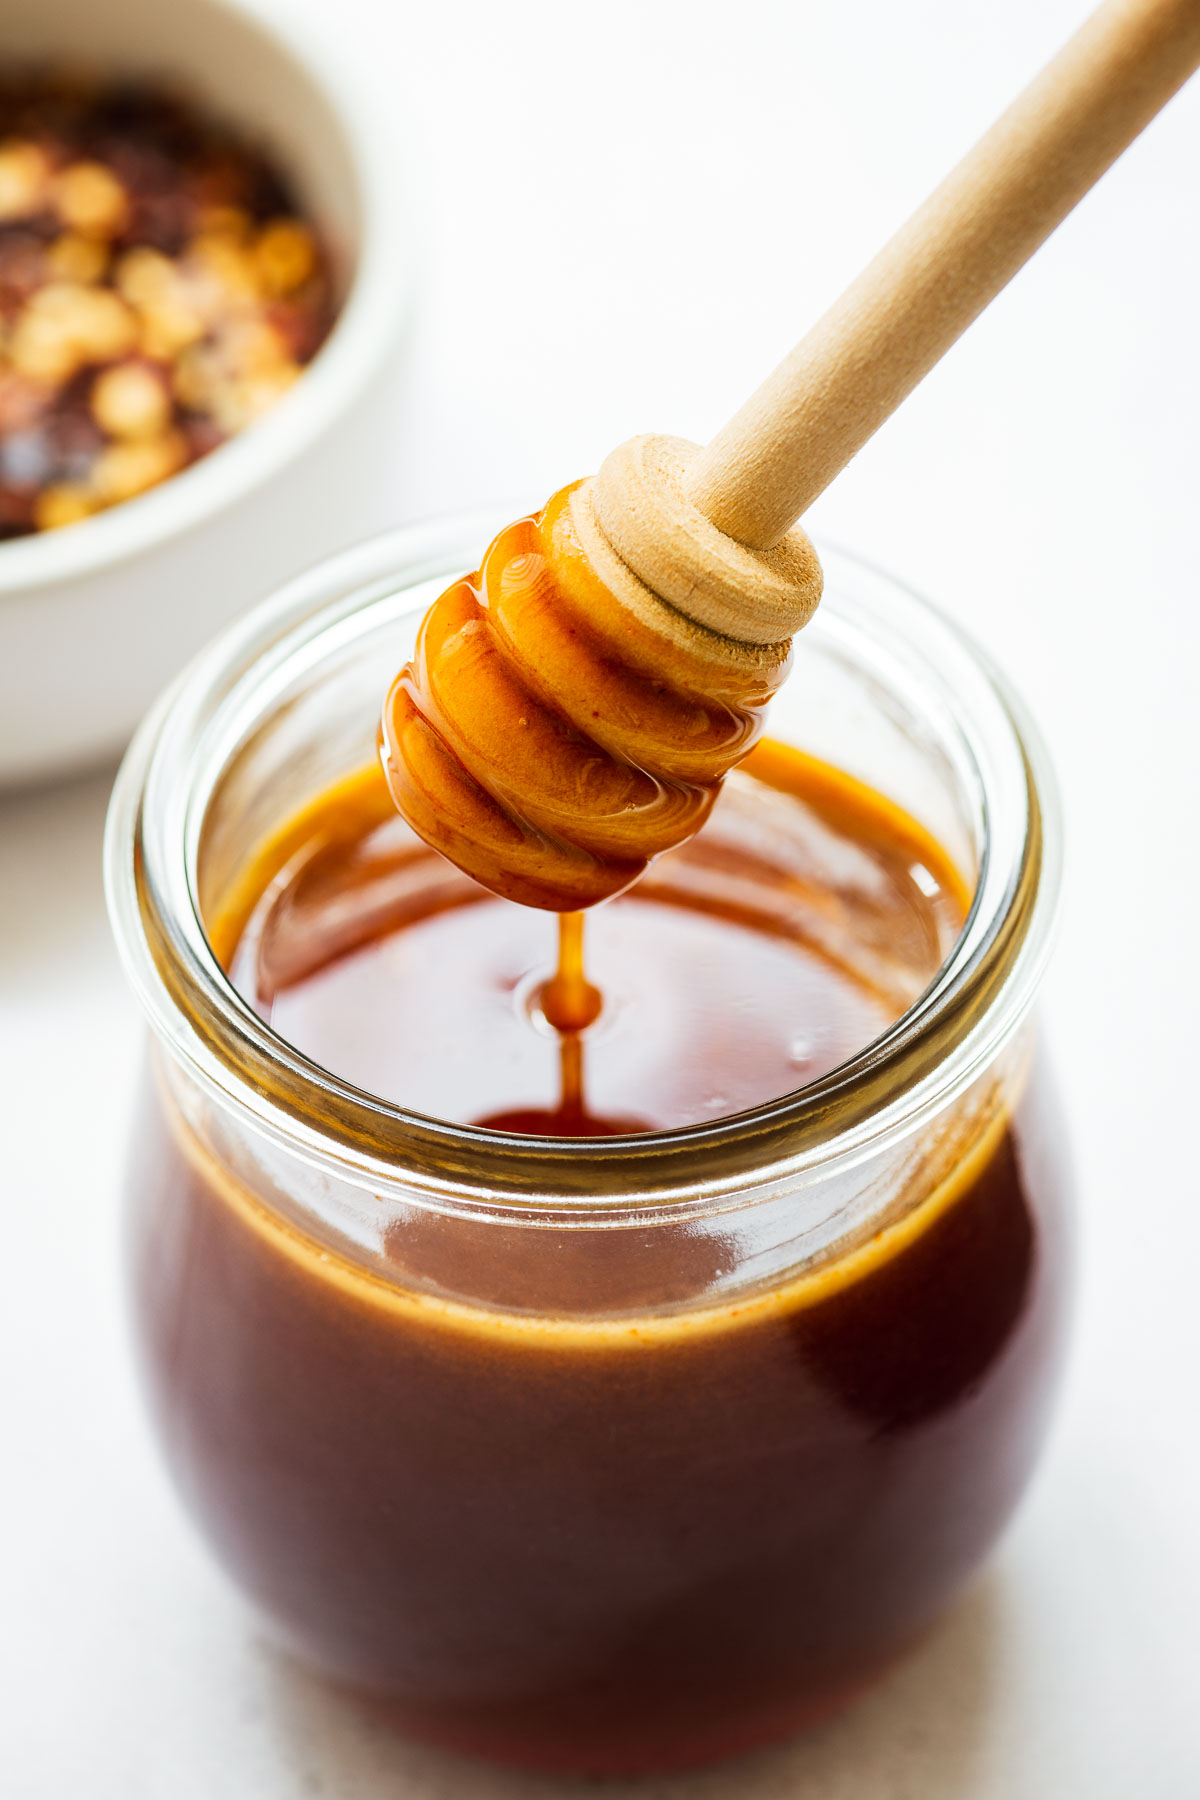 A close-up of hot honey sauce in a small glass jar with a honey dipper stick.